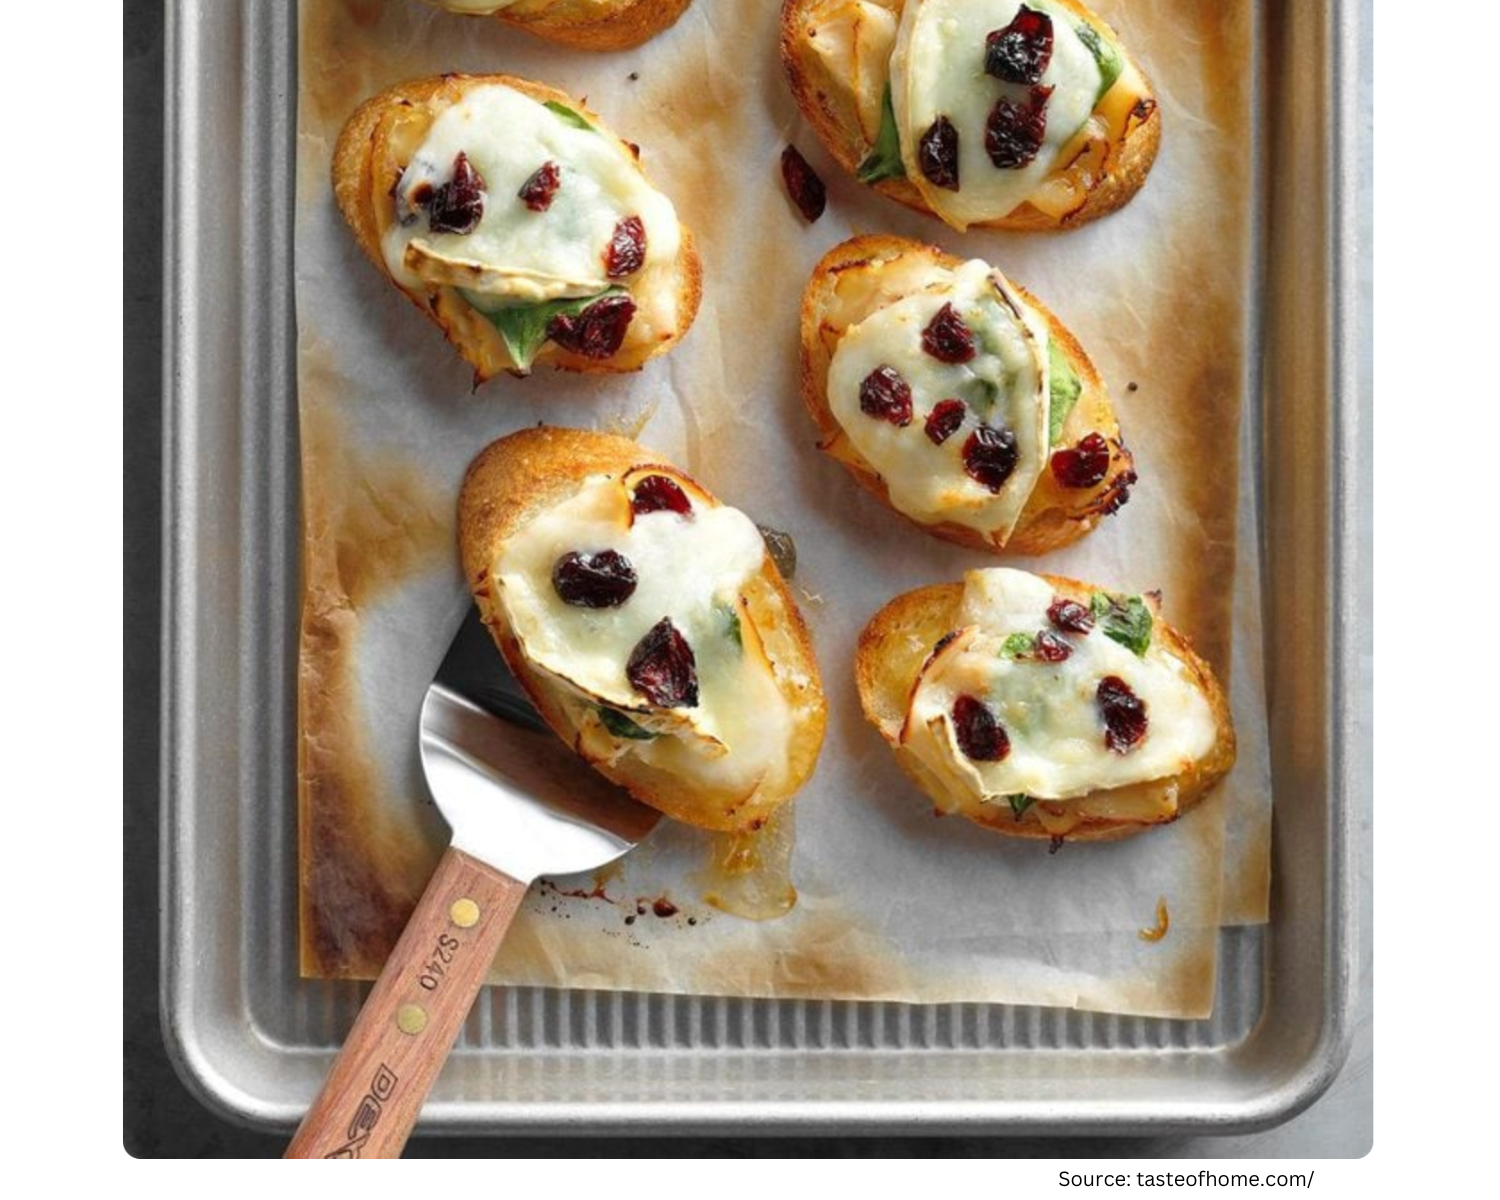 Roasted Chicken and Brie Holly Mini Bites
